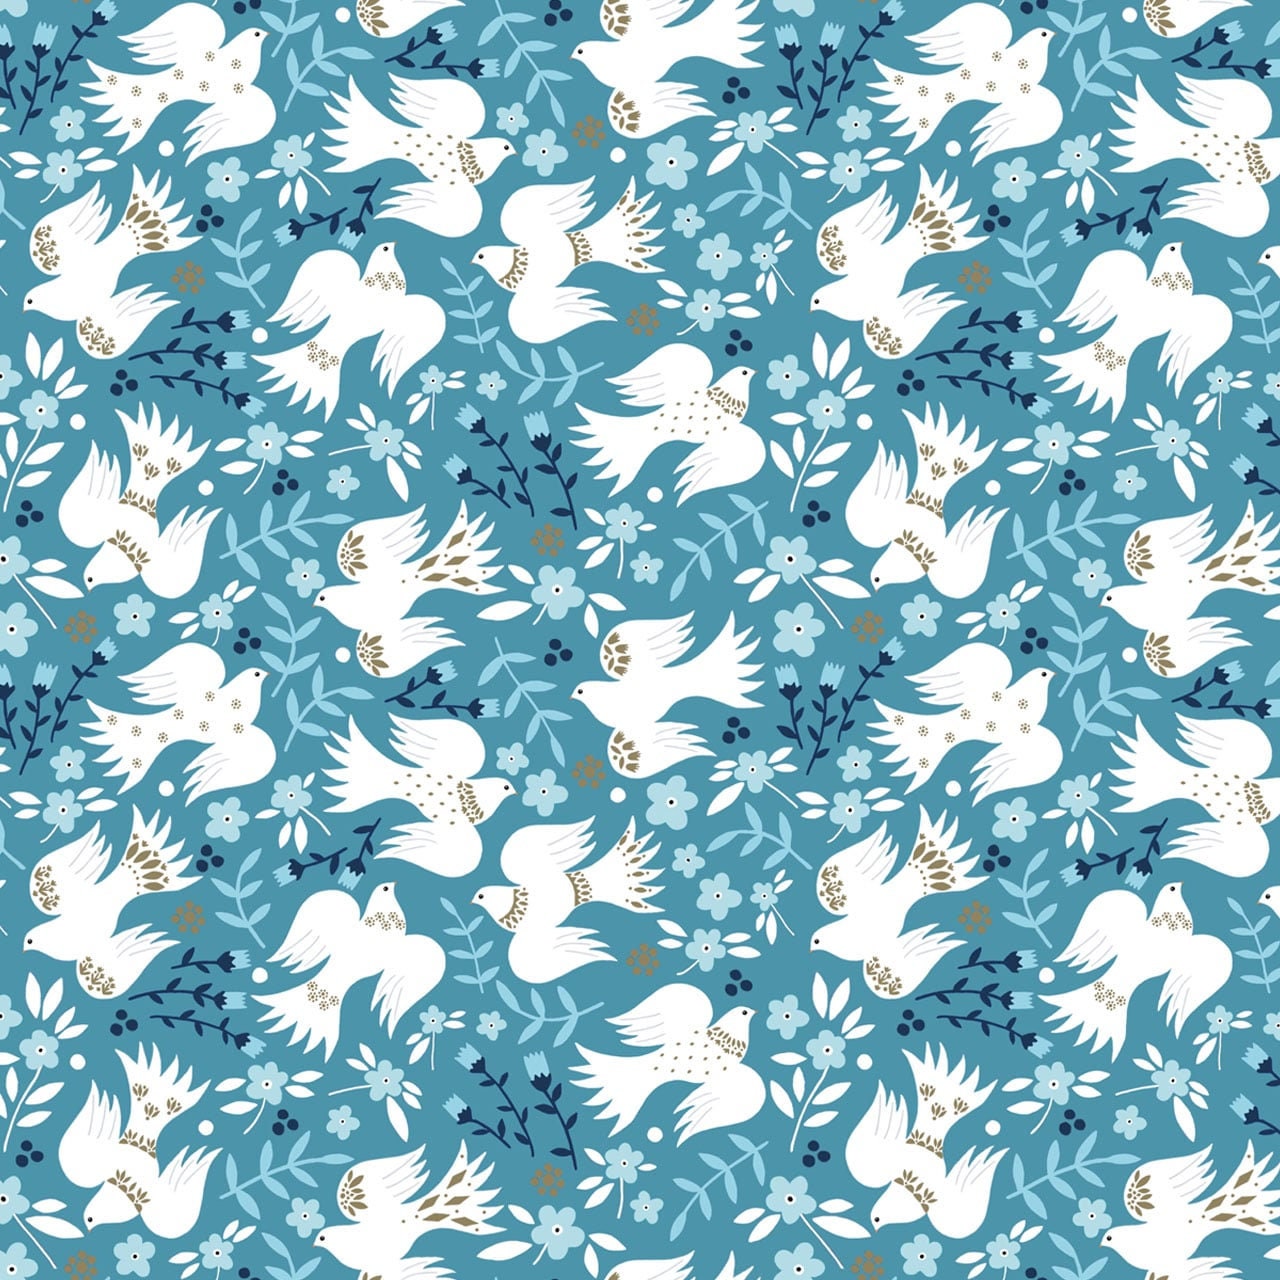 White Christmas doves on a blue floral cotton fabric - Starlit Hollow by Dashwood Studio